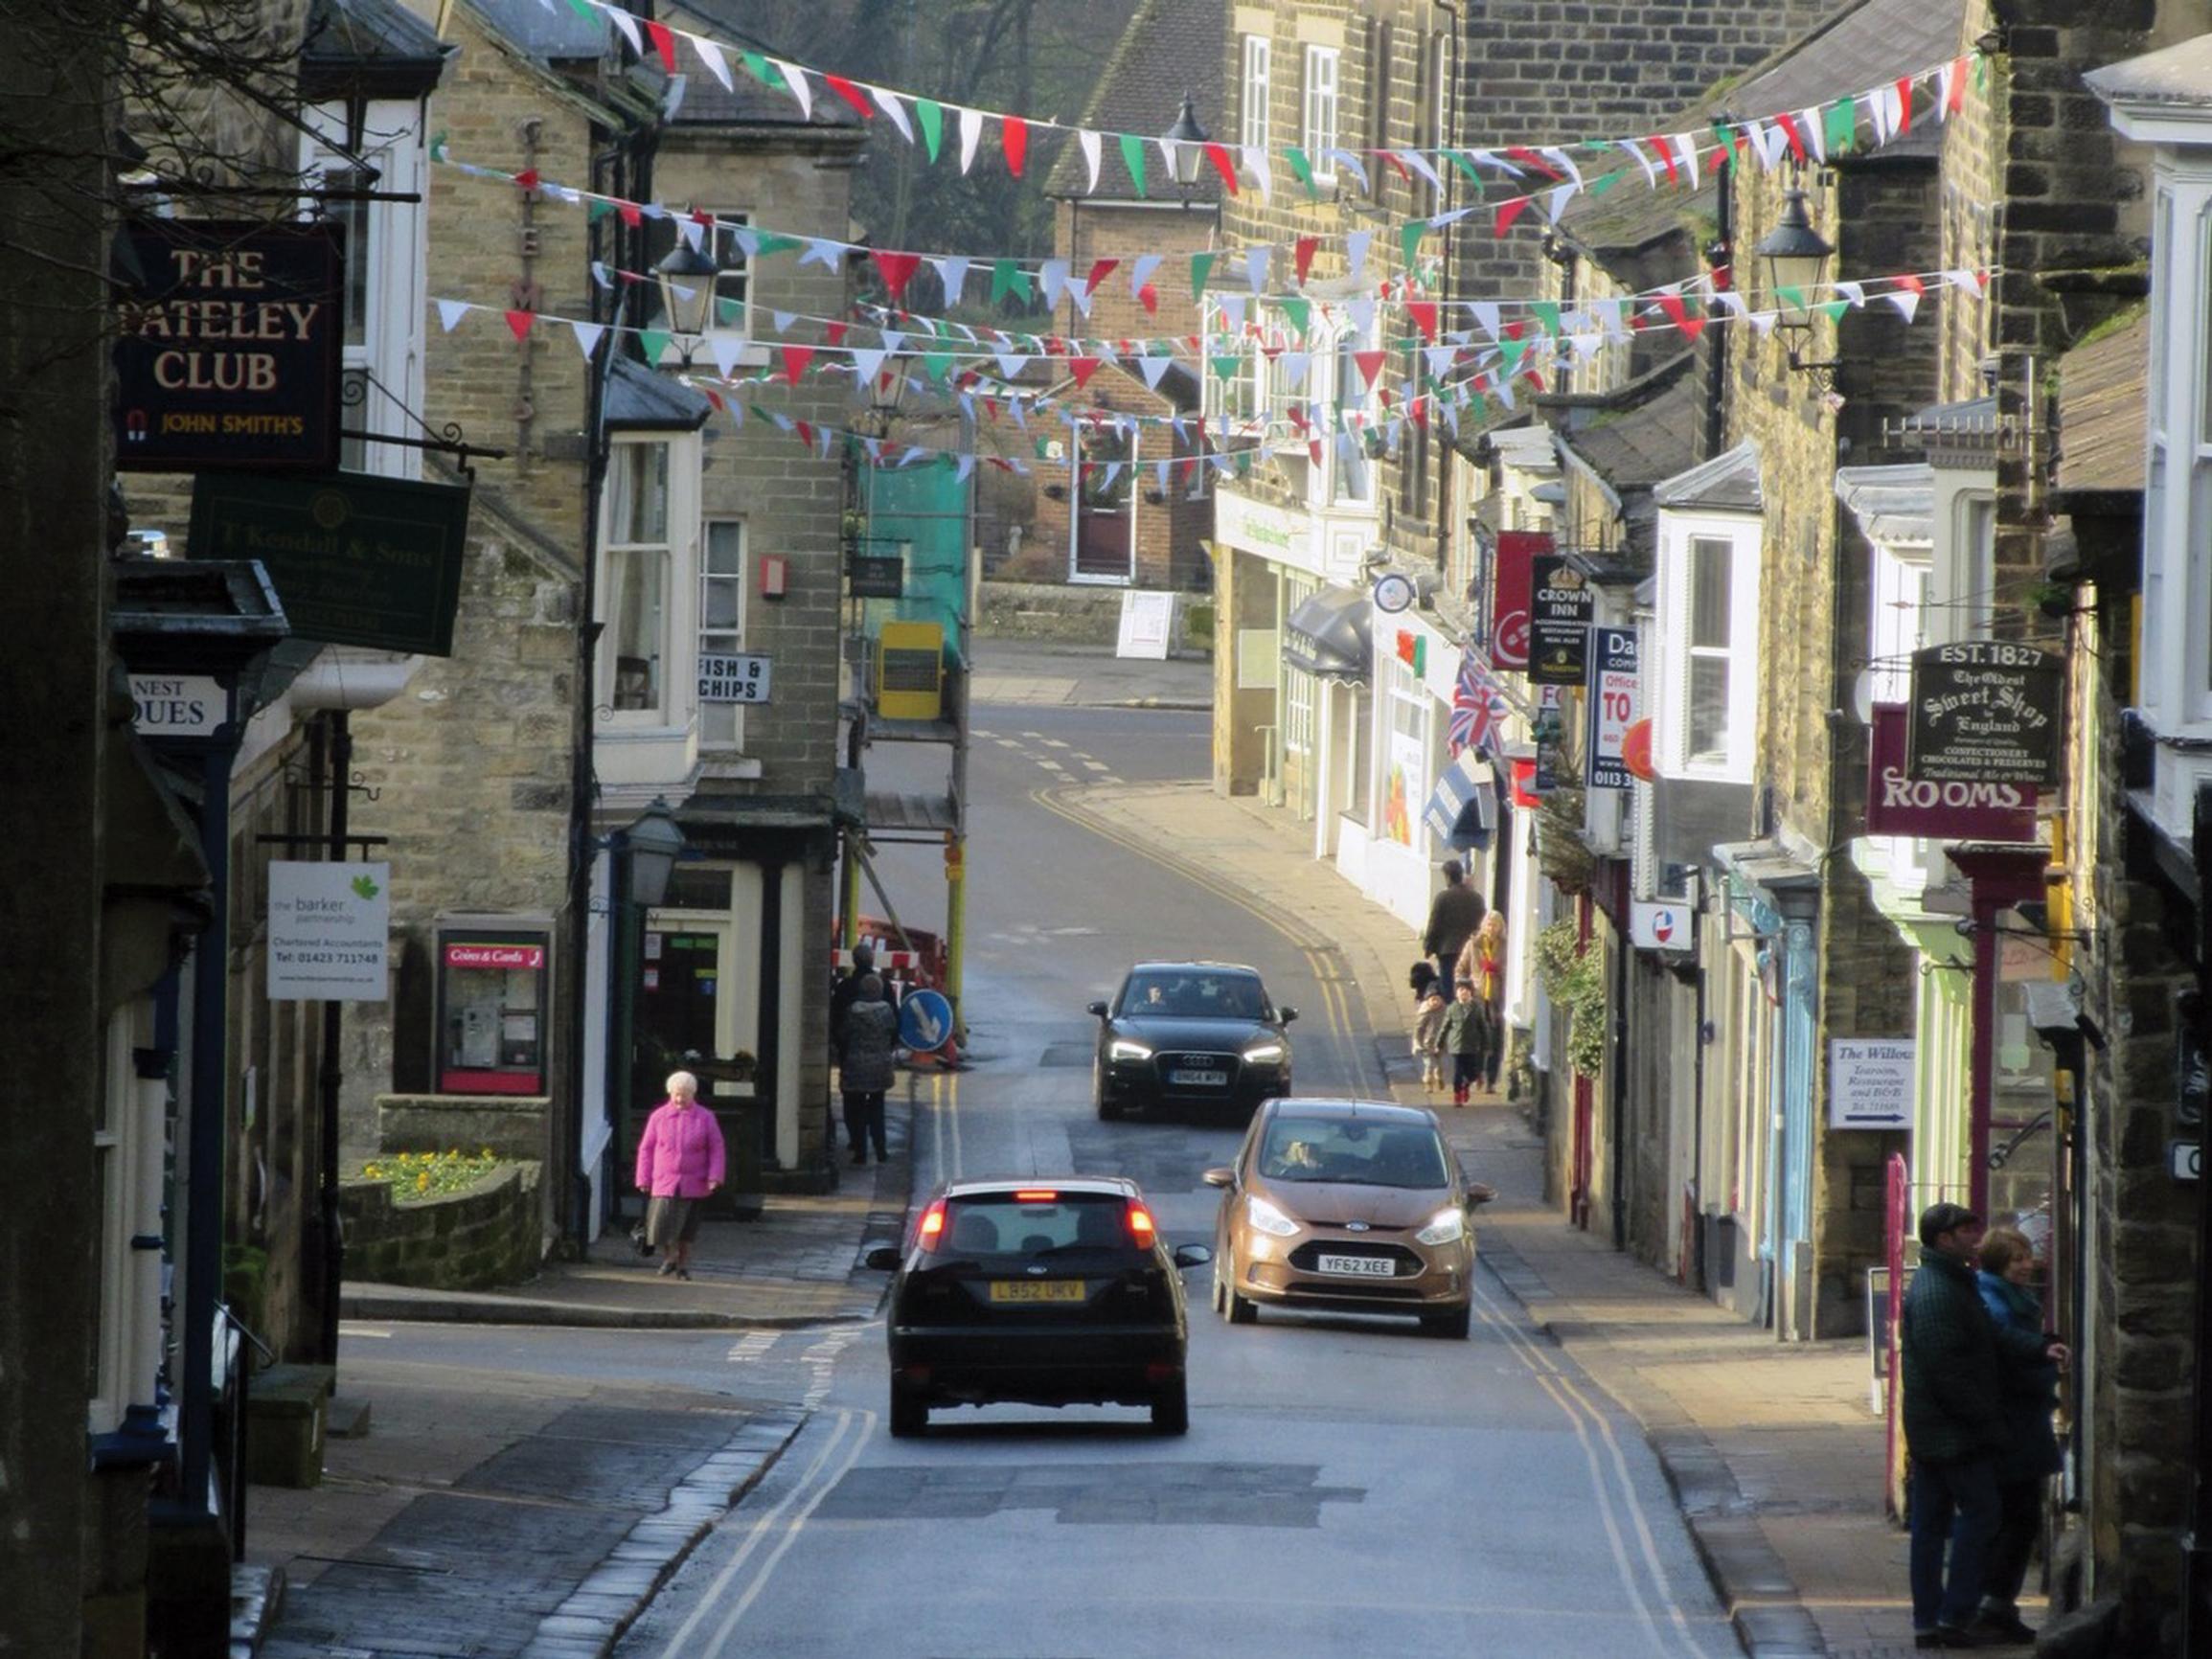 Narrow carriageway, much narrower footways, and out of season: yet Pateley Bridge still thrives